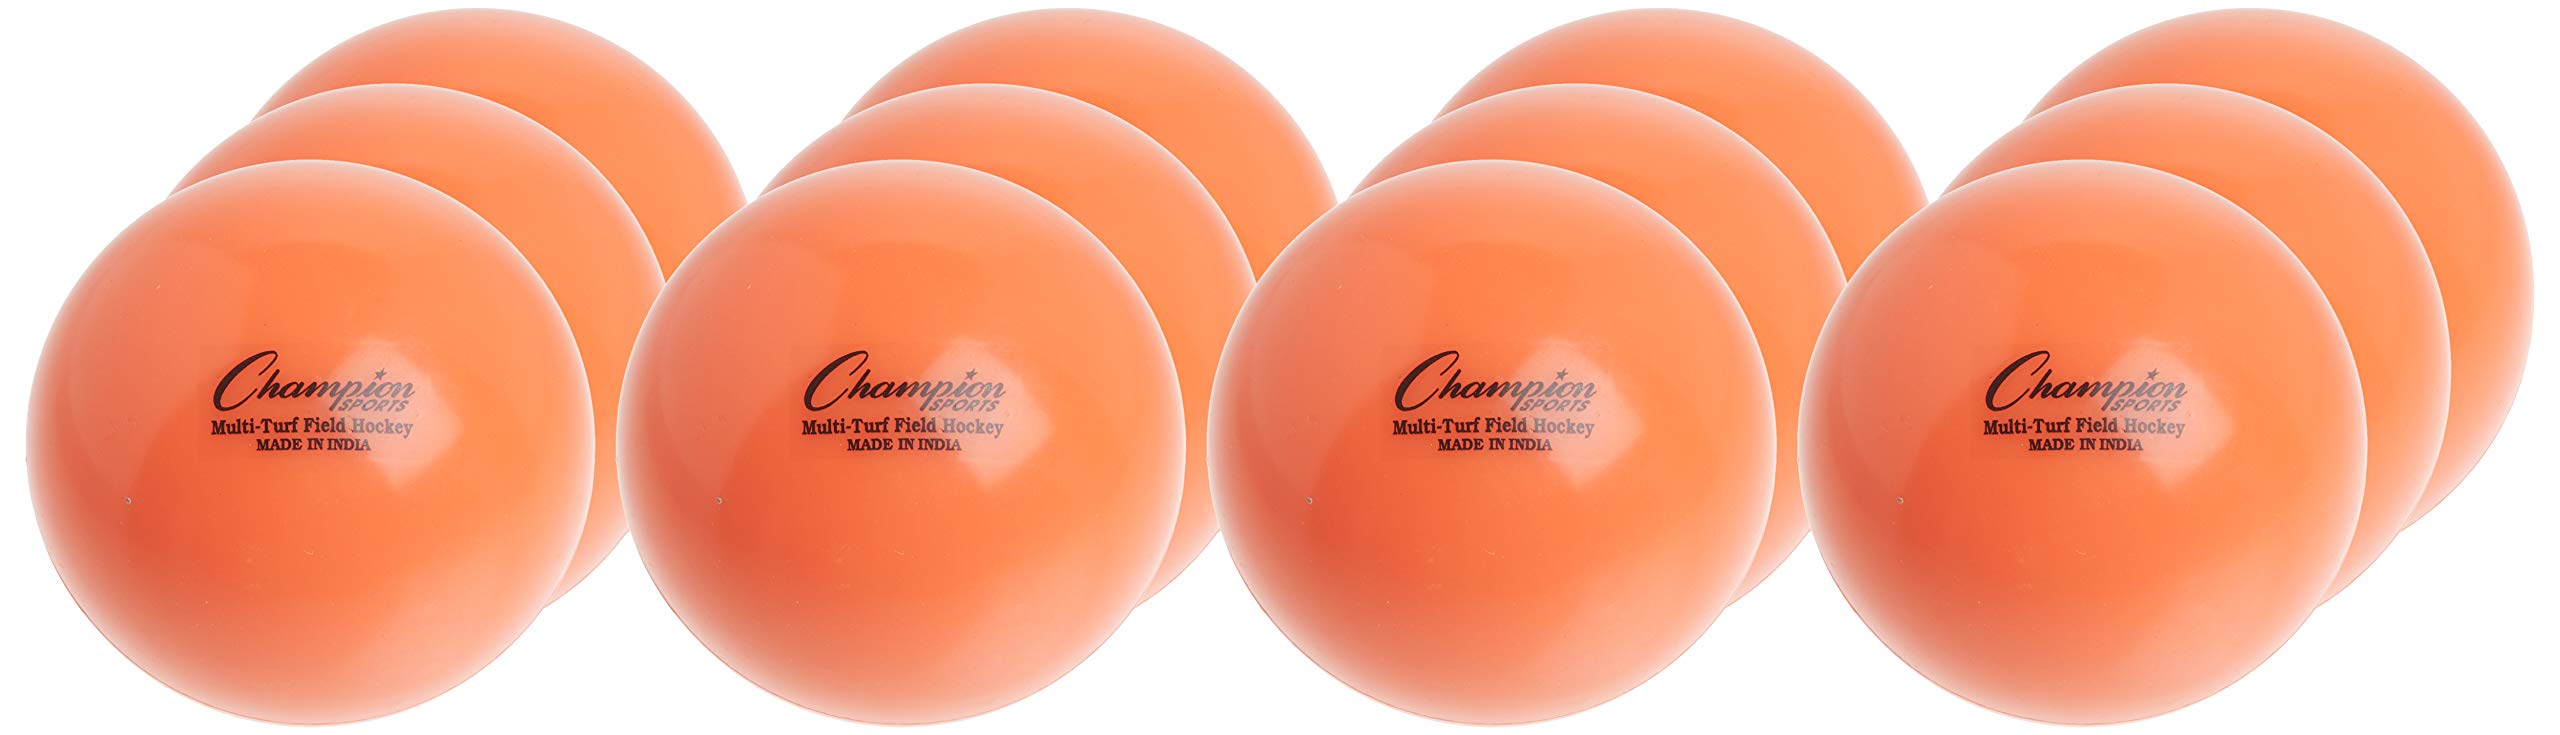 Champion Sports Field Hockey Practice Balls - 12 Pack in Multiple Colors